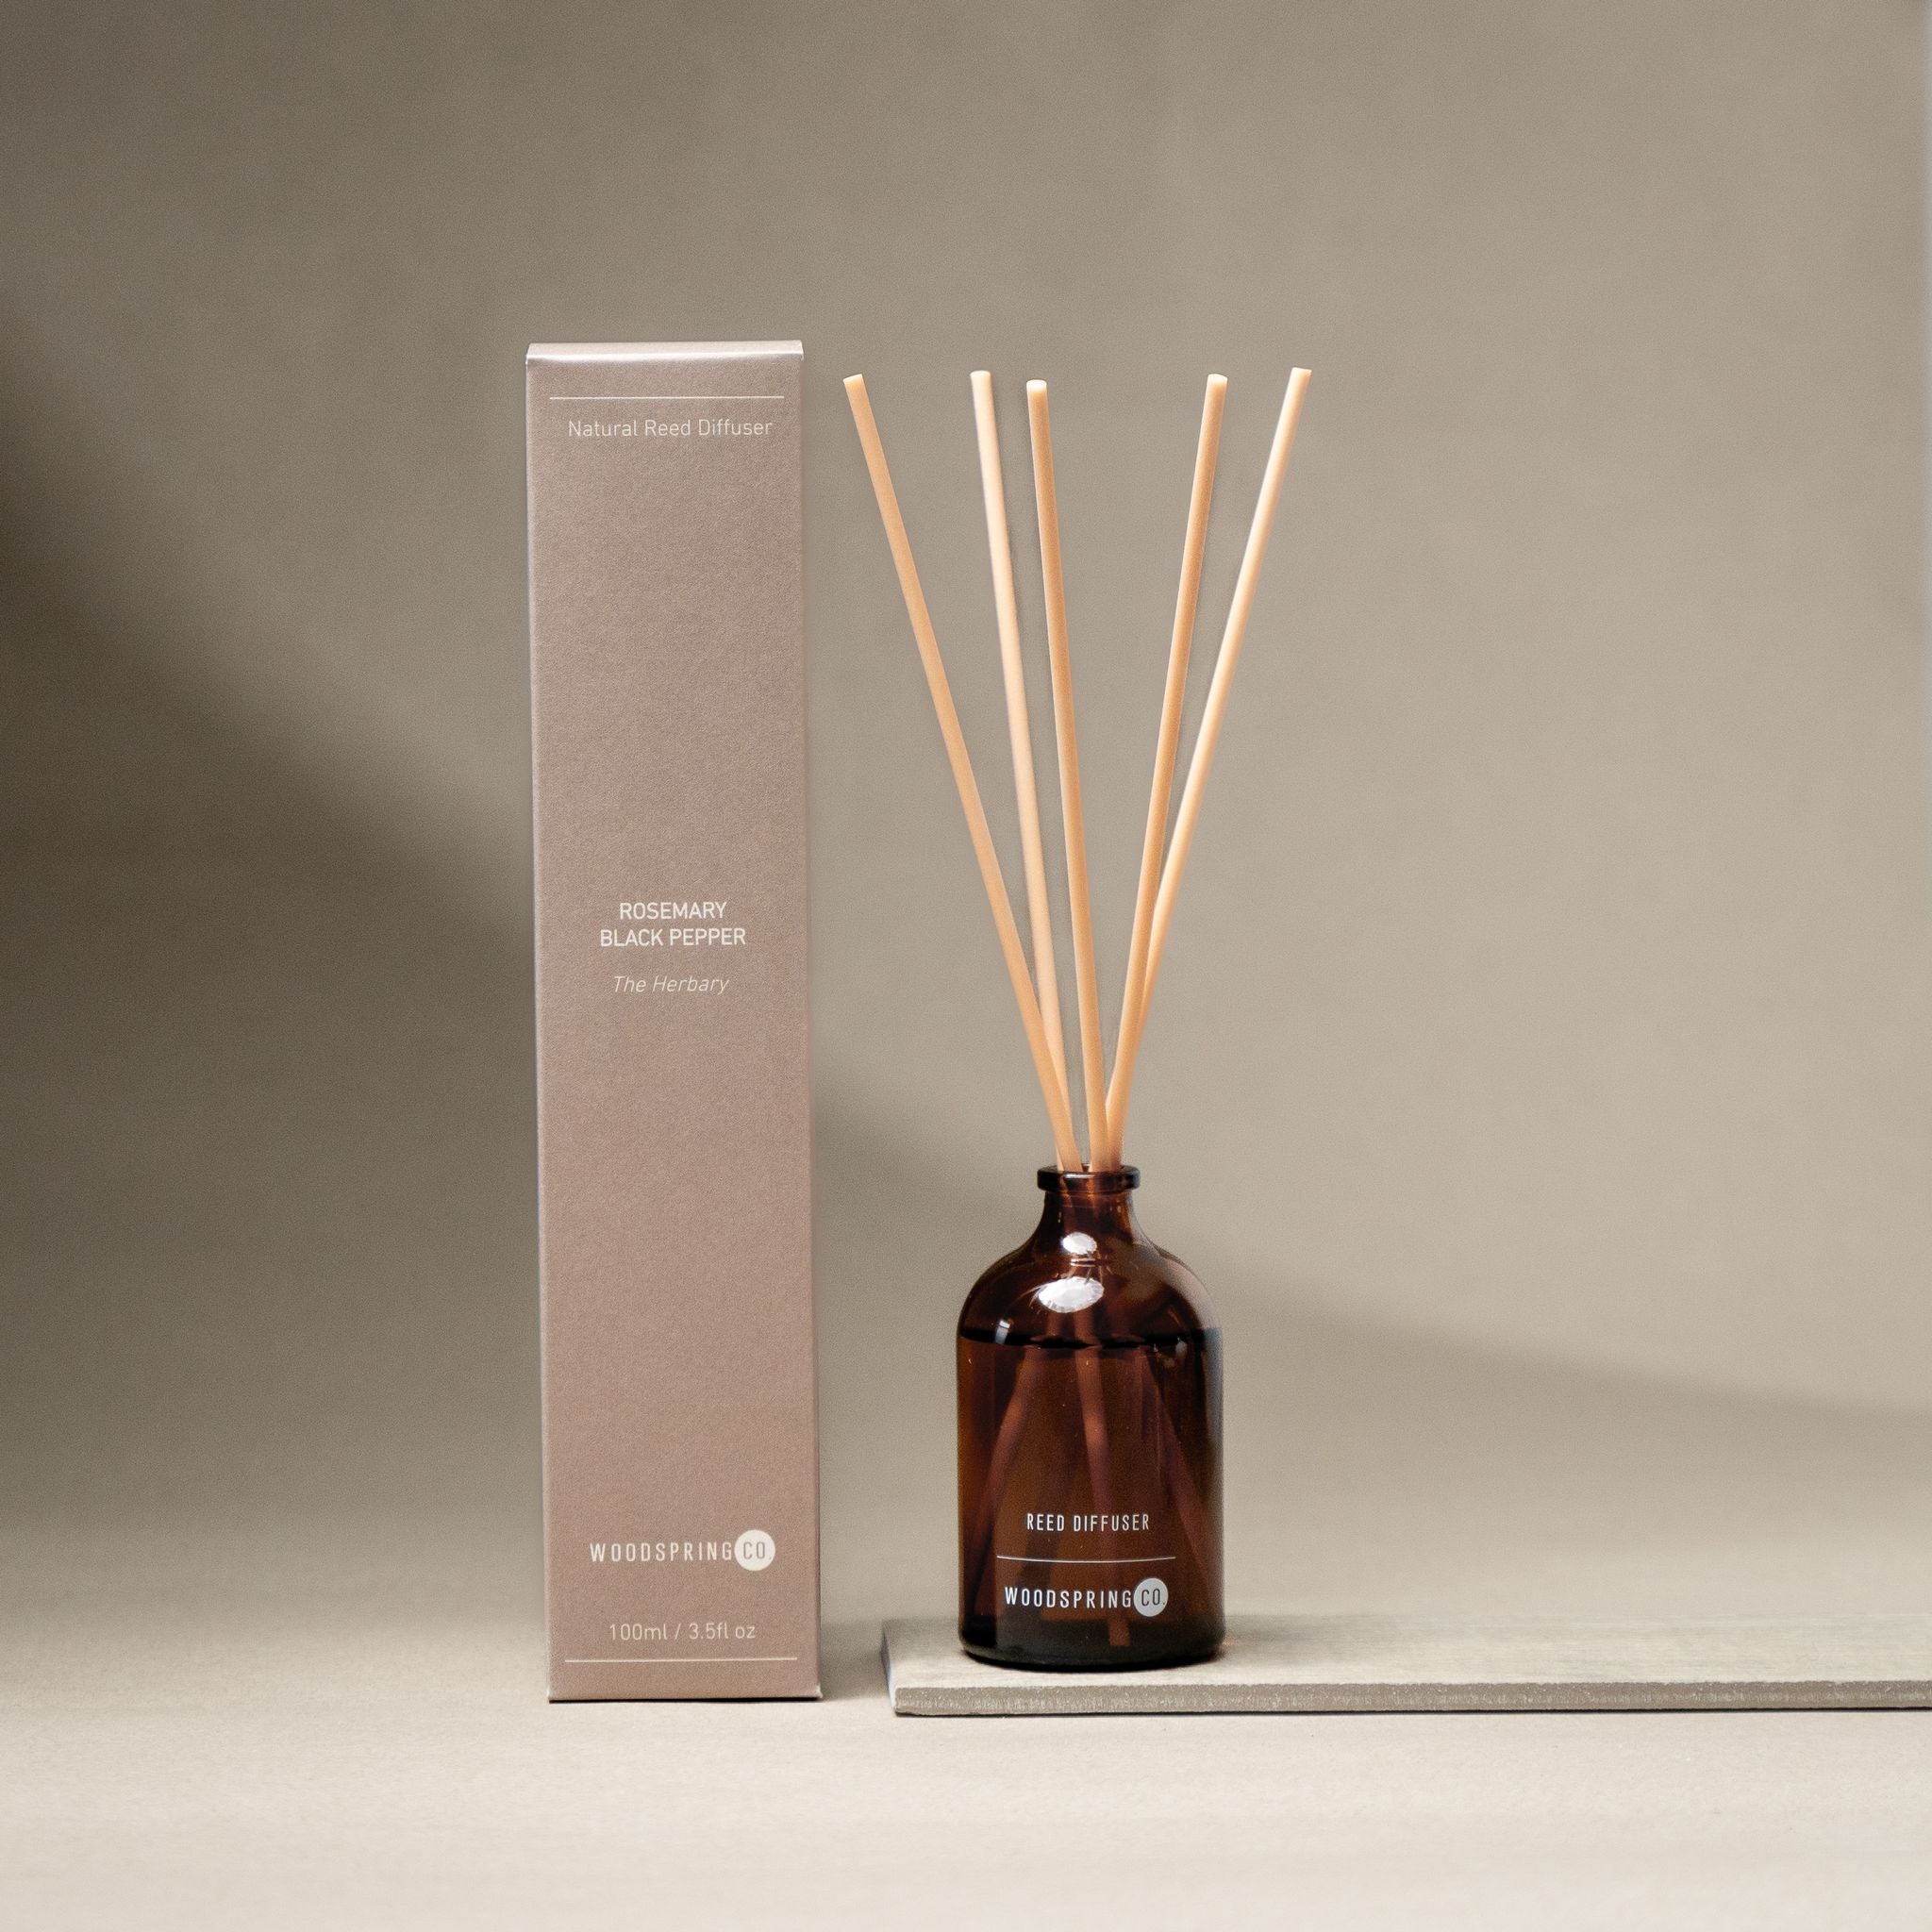 Rosemary + Black Pepper Reed Diffuser